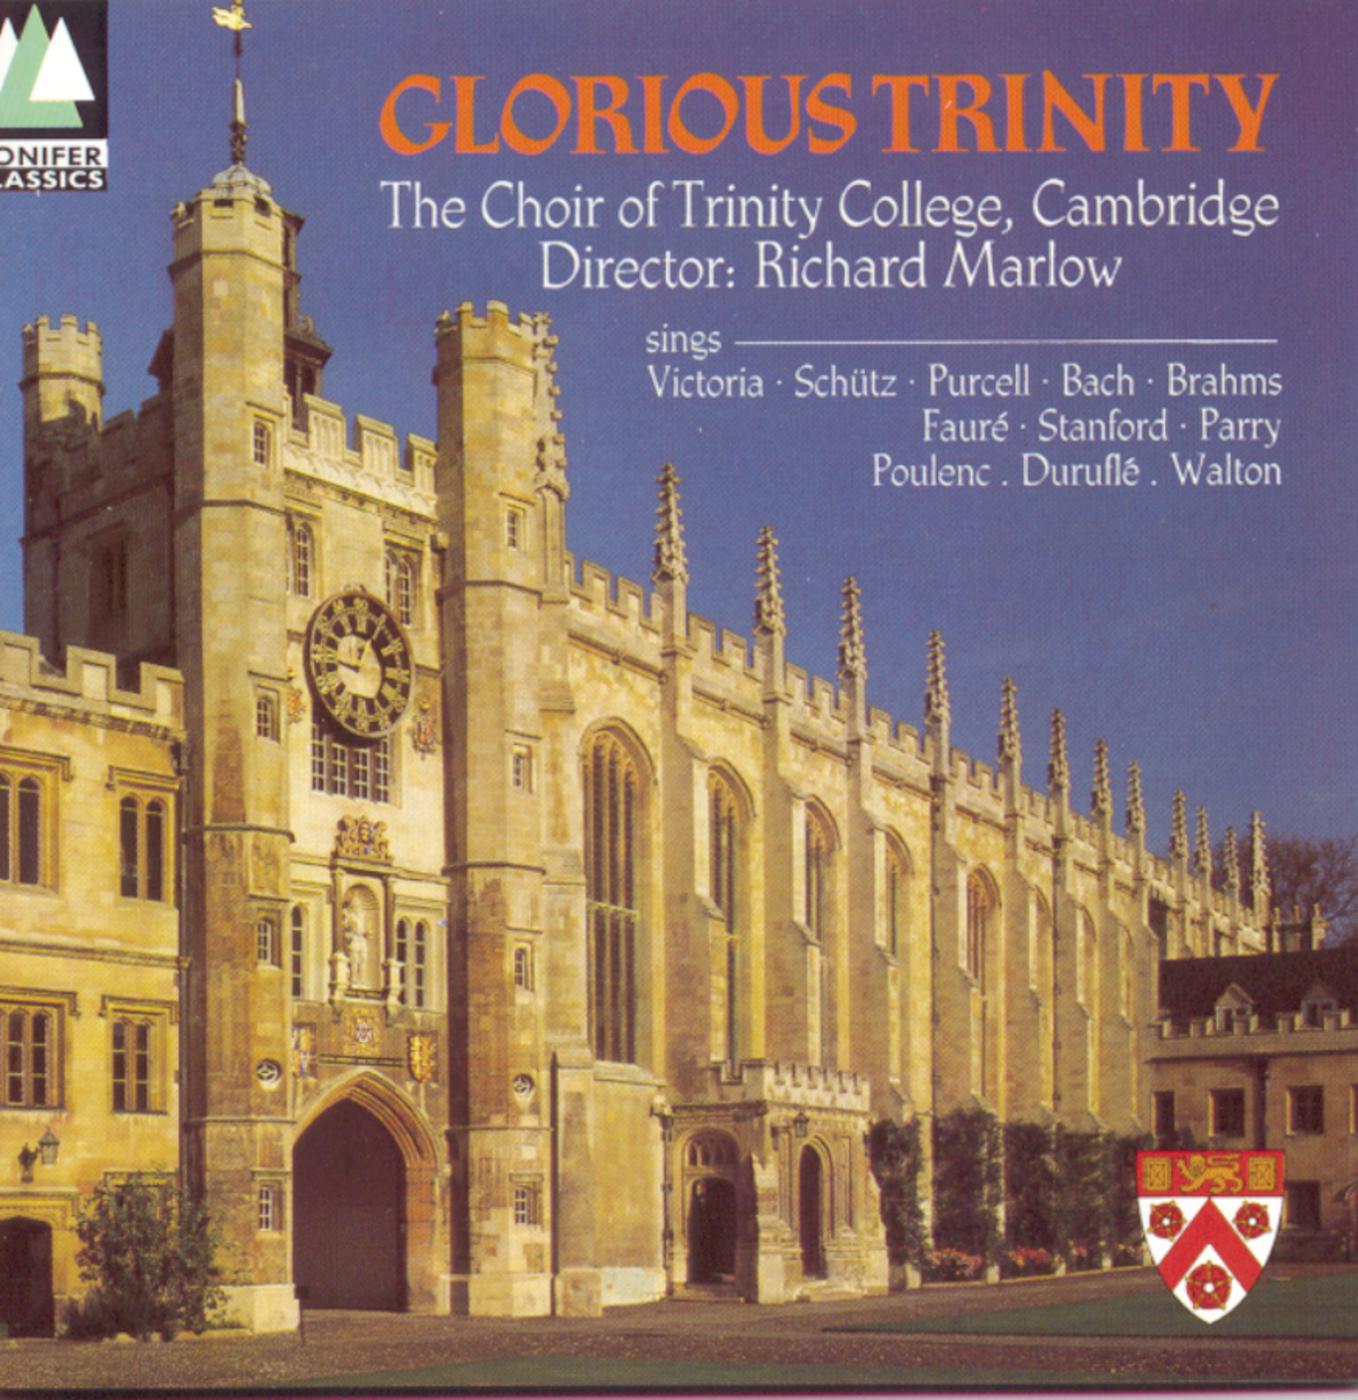 The Choir of Trinity College Cambridge - Songs of Farewell:Never weather-beaten sail